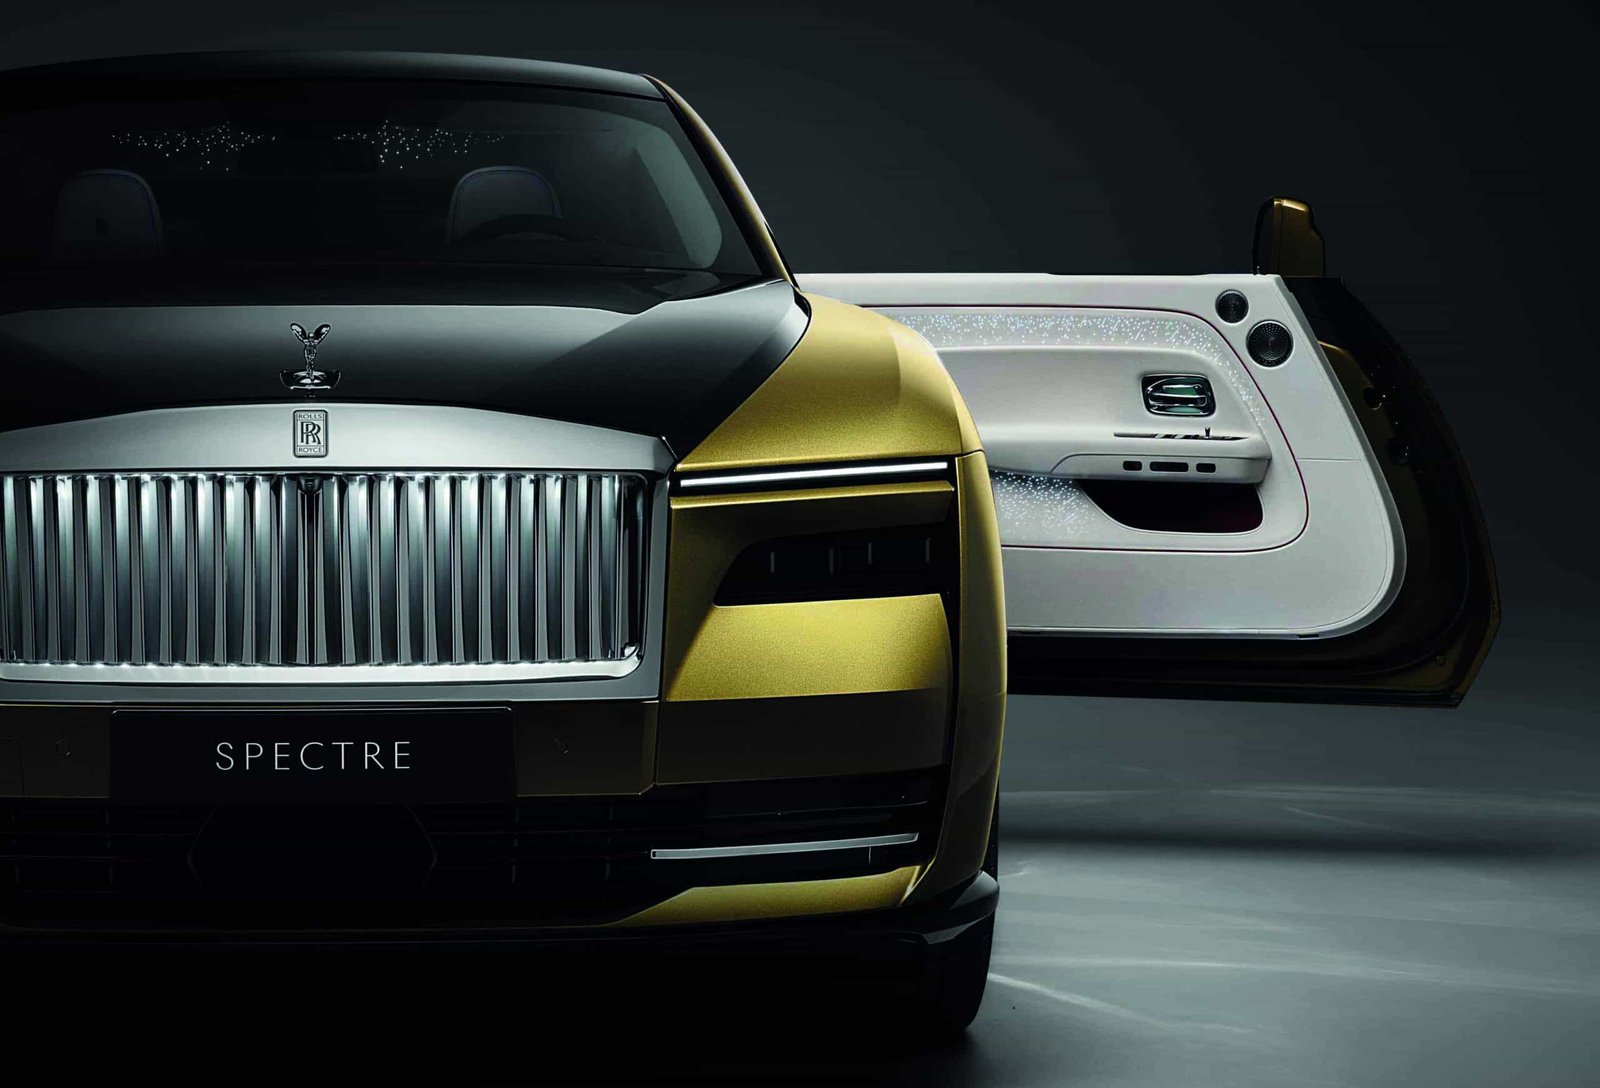 The Rolls Royce Phantom concept showcases bold innovation and embodies the spirit of luxury.